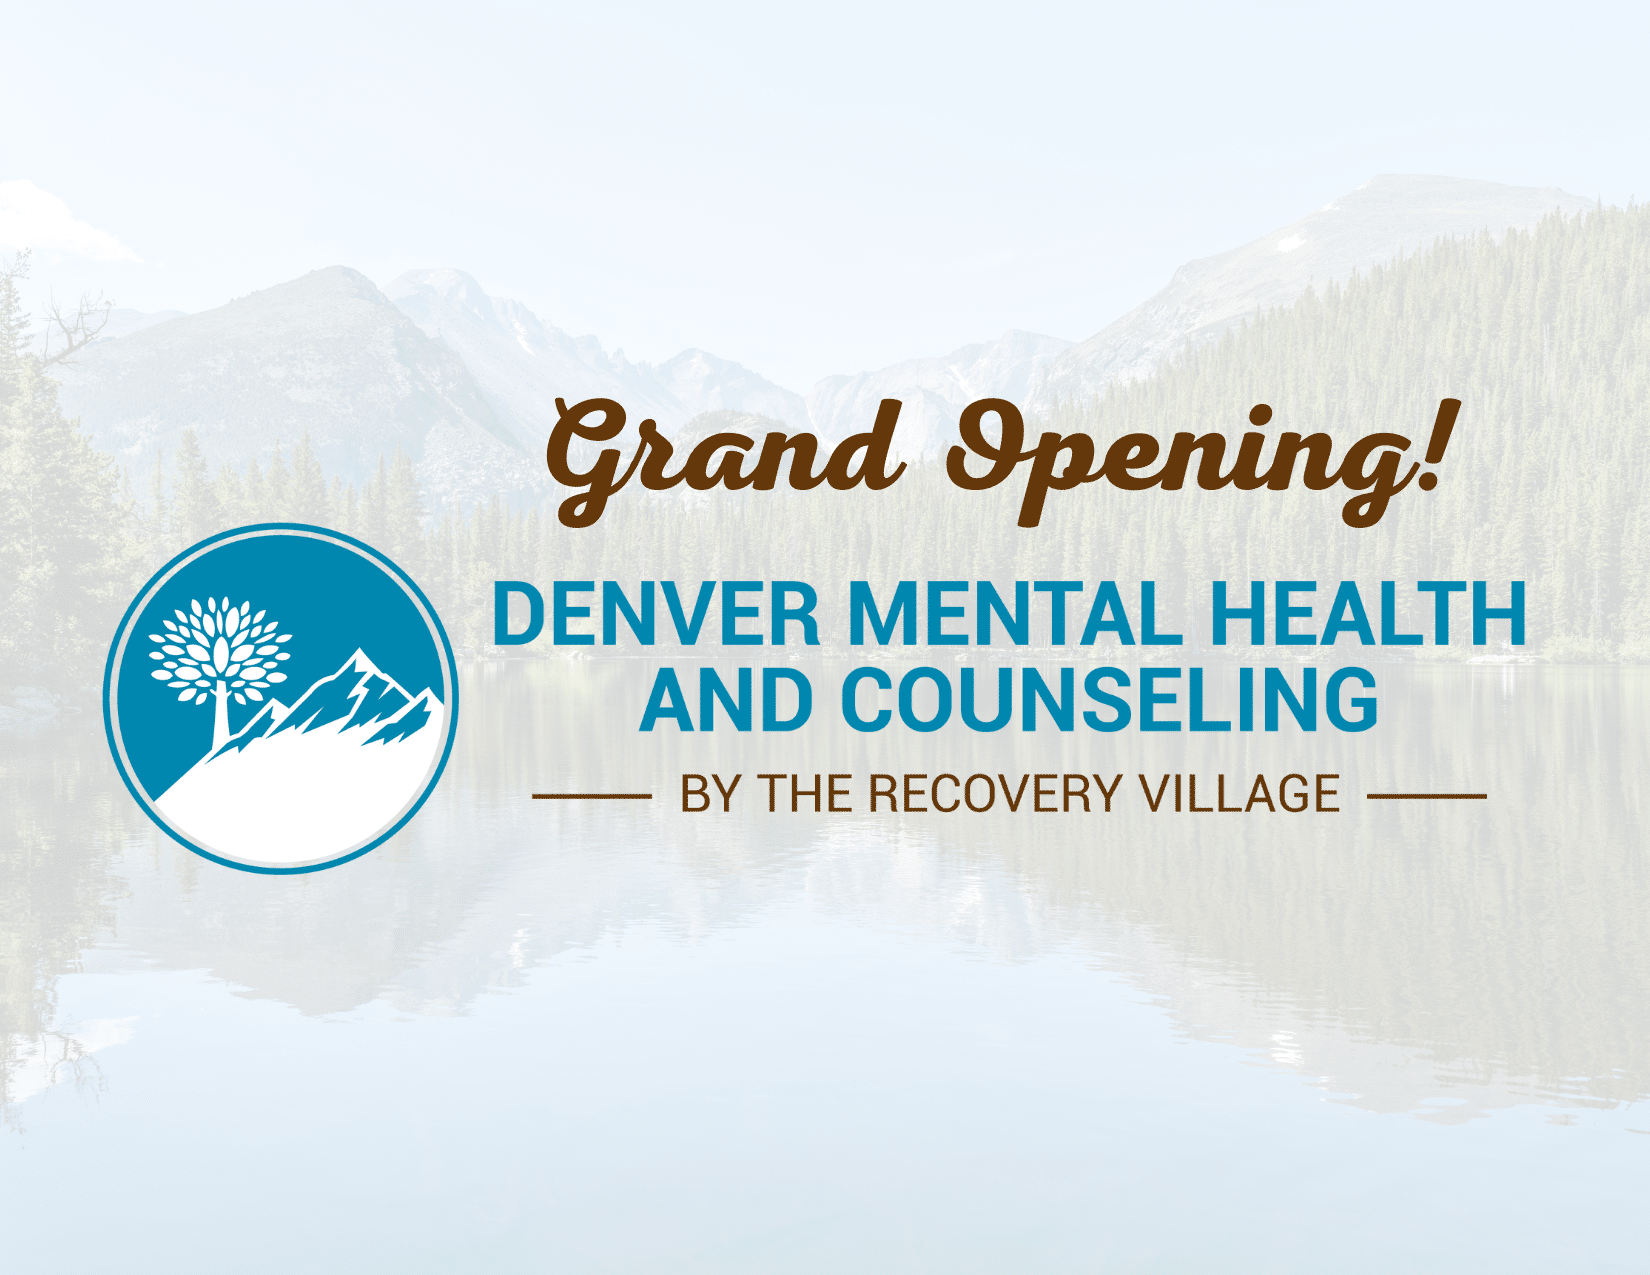 Grand Opening of Denver Mental Health and Counseling